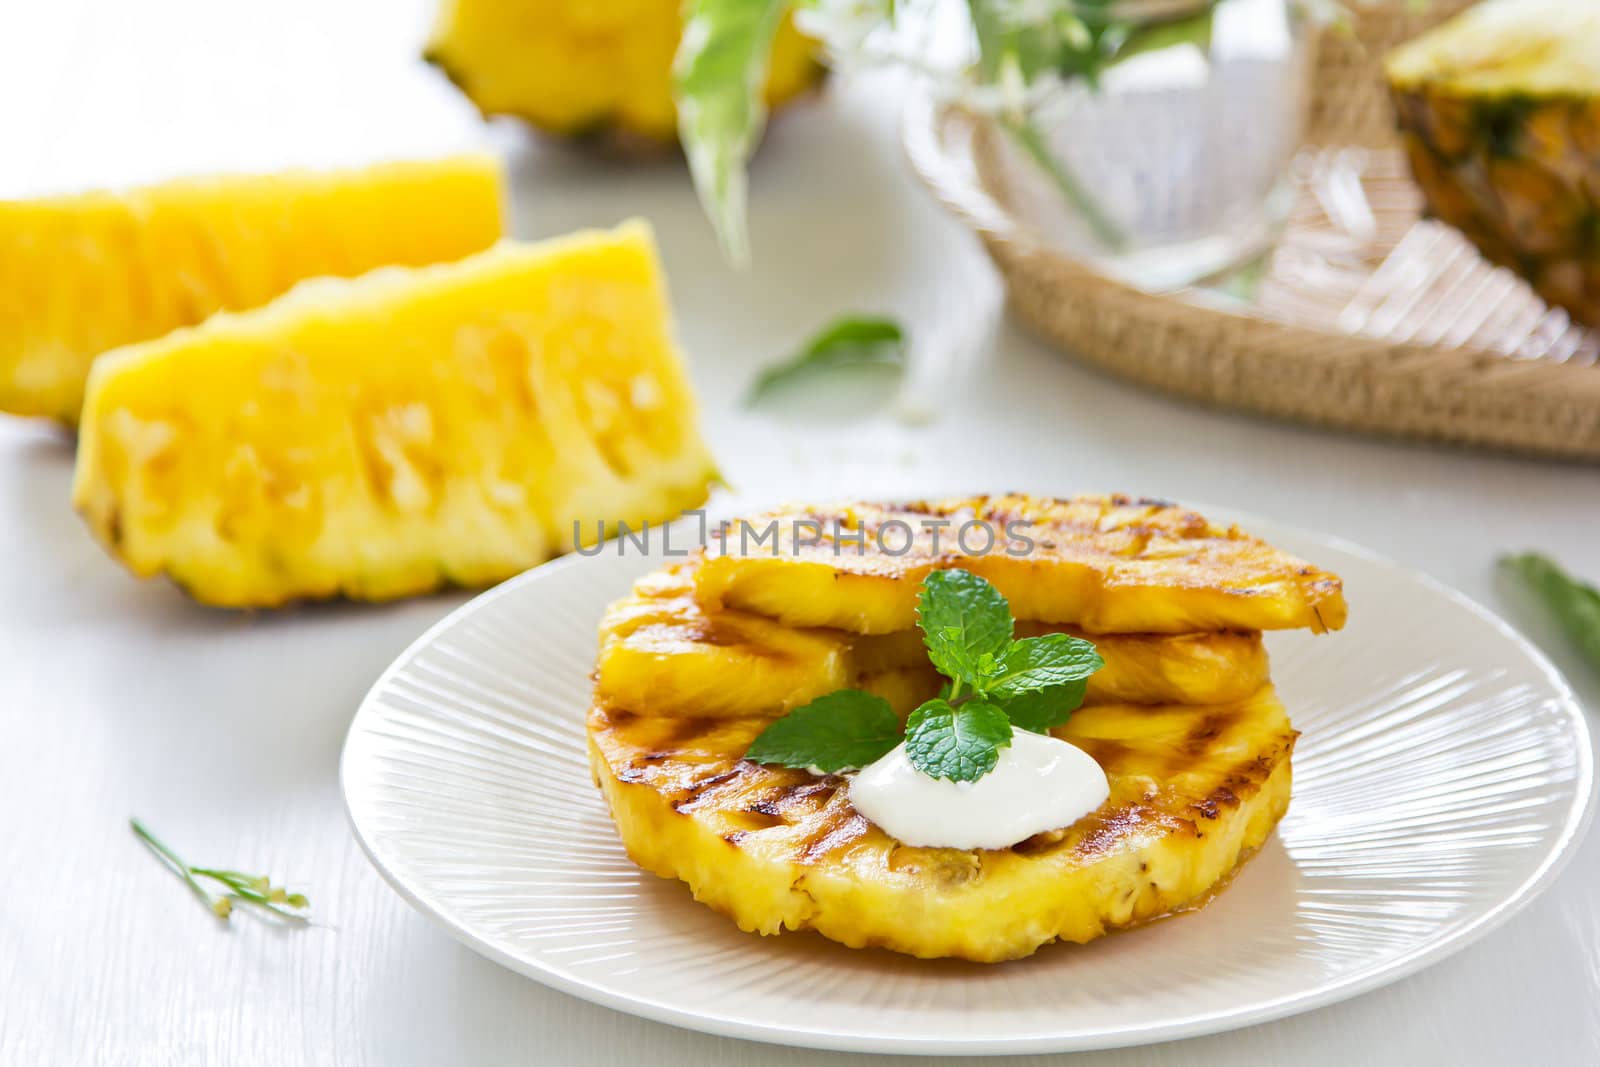 Grilled Pineapple by vanillaechoes